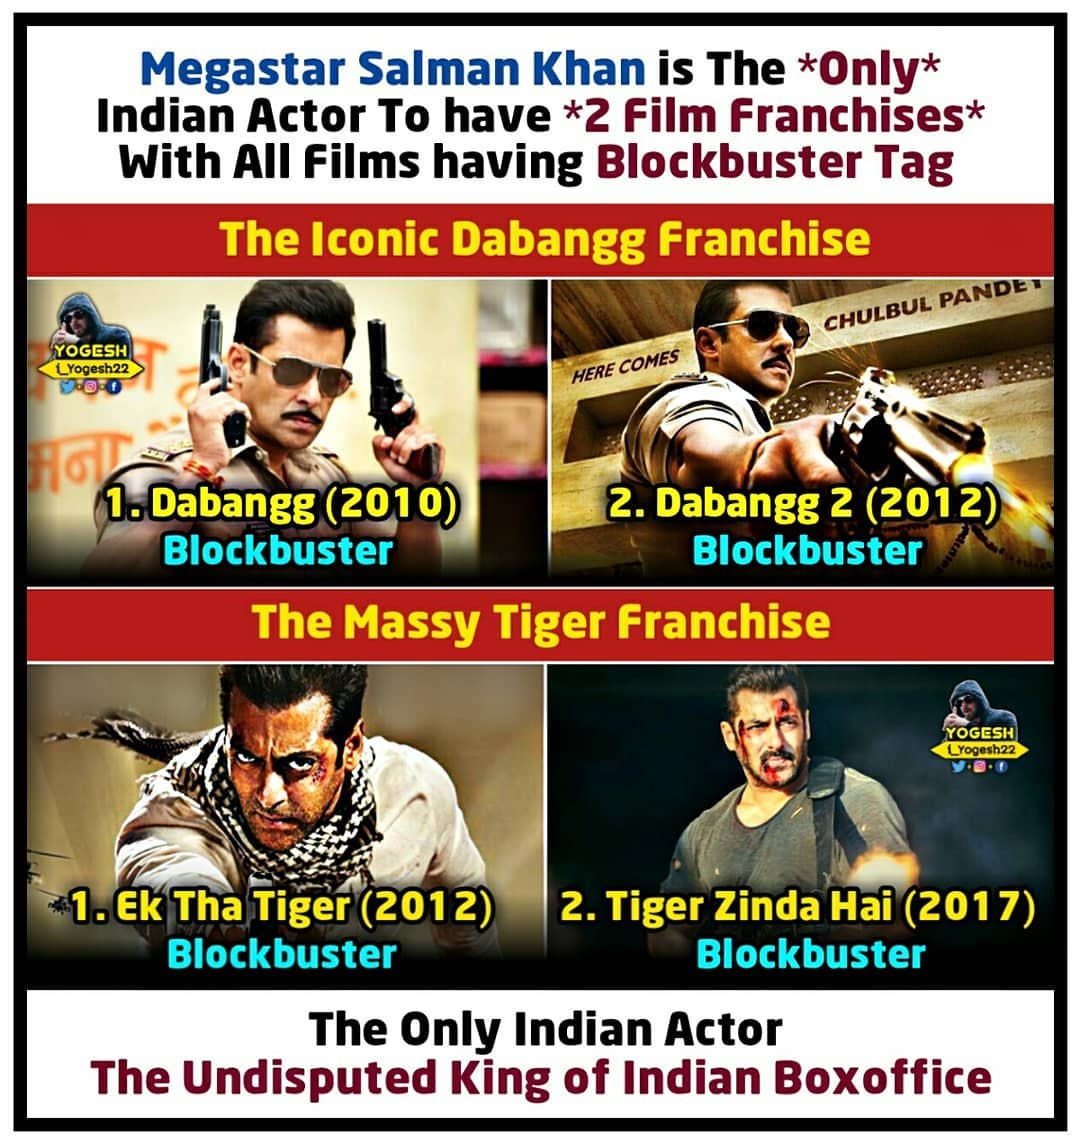 Megastar #SalmanKhan is The *Only* Indian Actor To have *2 Film Franchises* With All Films having *Blockbuster Tag**!
- Dabangg (2010) - BLOCKBUSTER - Dabangg2 (2012) - BLOCKBUSTER 
- Ek Tha Tiger (2012) - BLOCKBUSTER
- Tiger Zinda Hai (2017) - BLOCKBUSTER. 

Salman Khan Rules!🔥